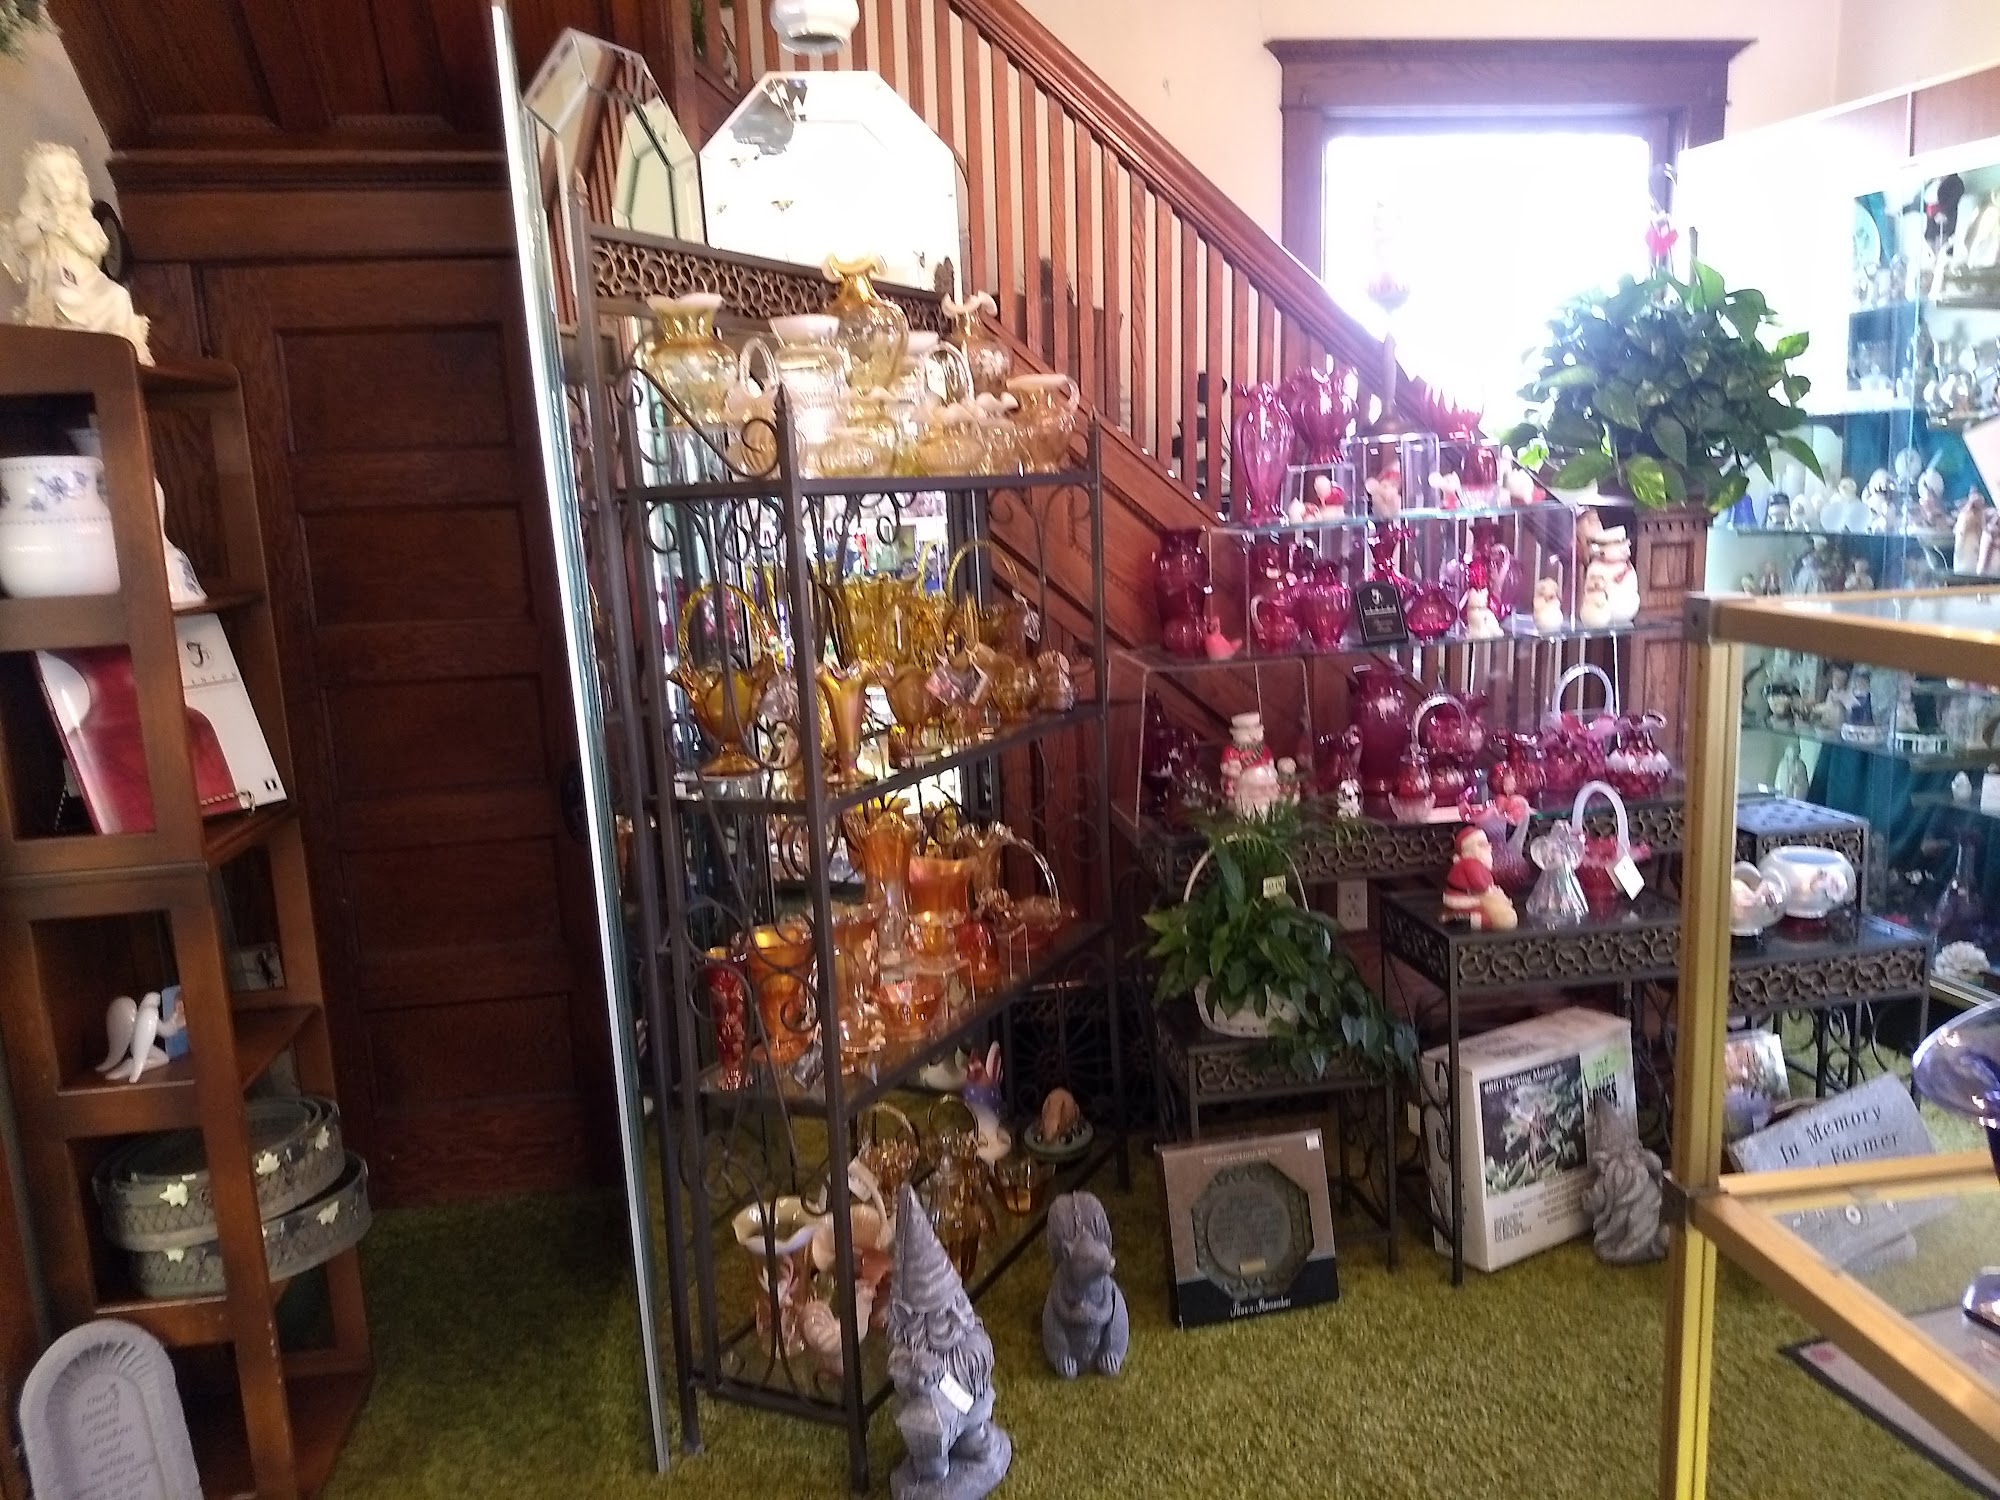 Olson's Flowers & Gifts 214 E Main St, Mt Horeb Wisconsin 53572